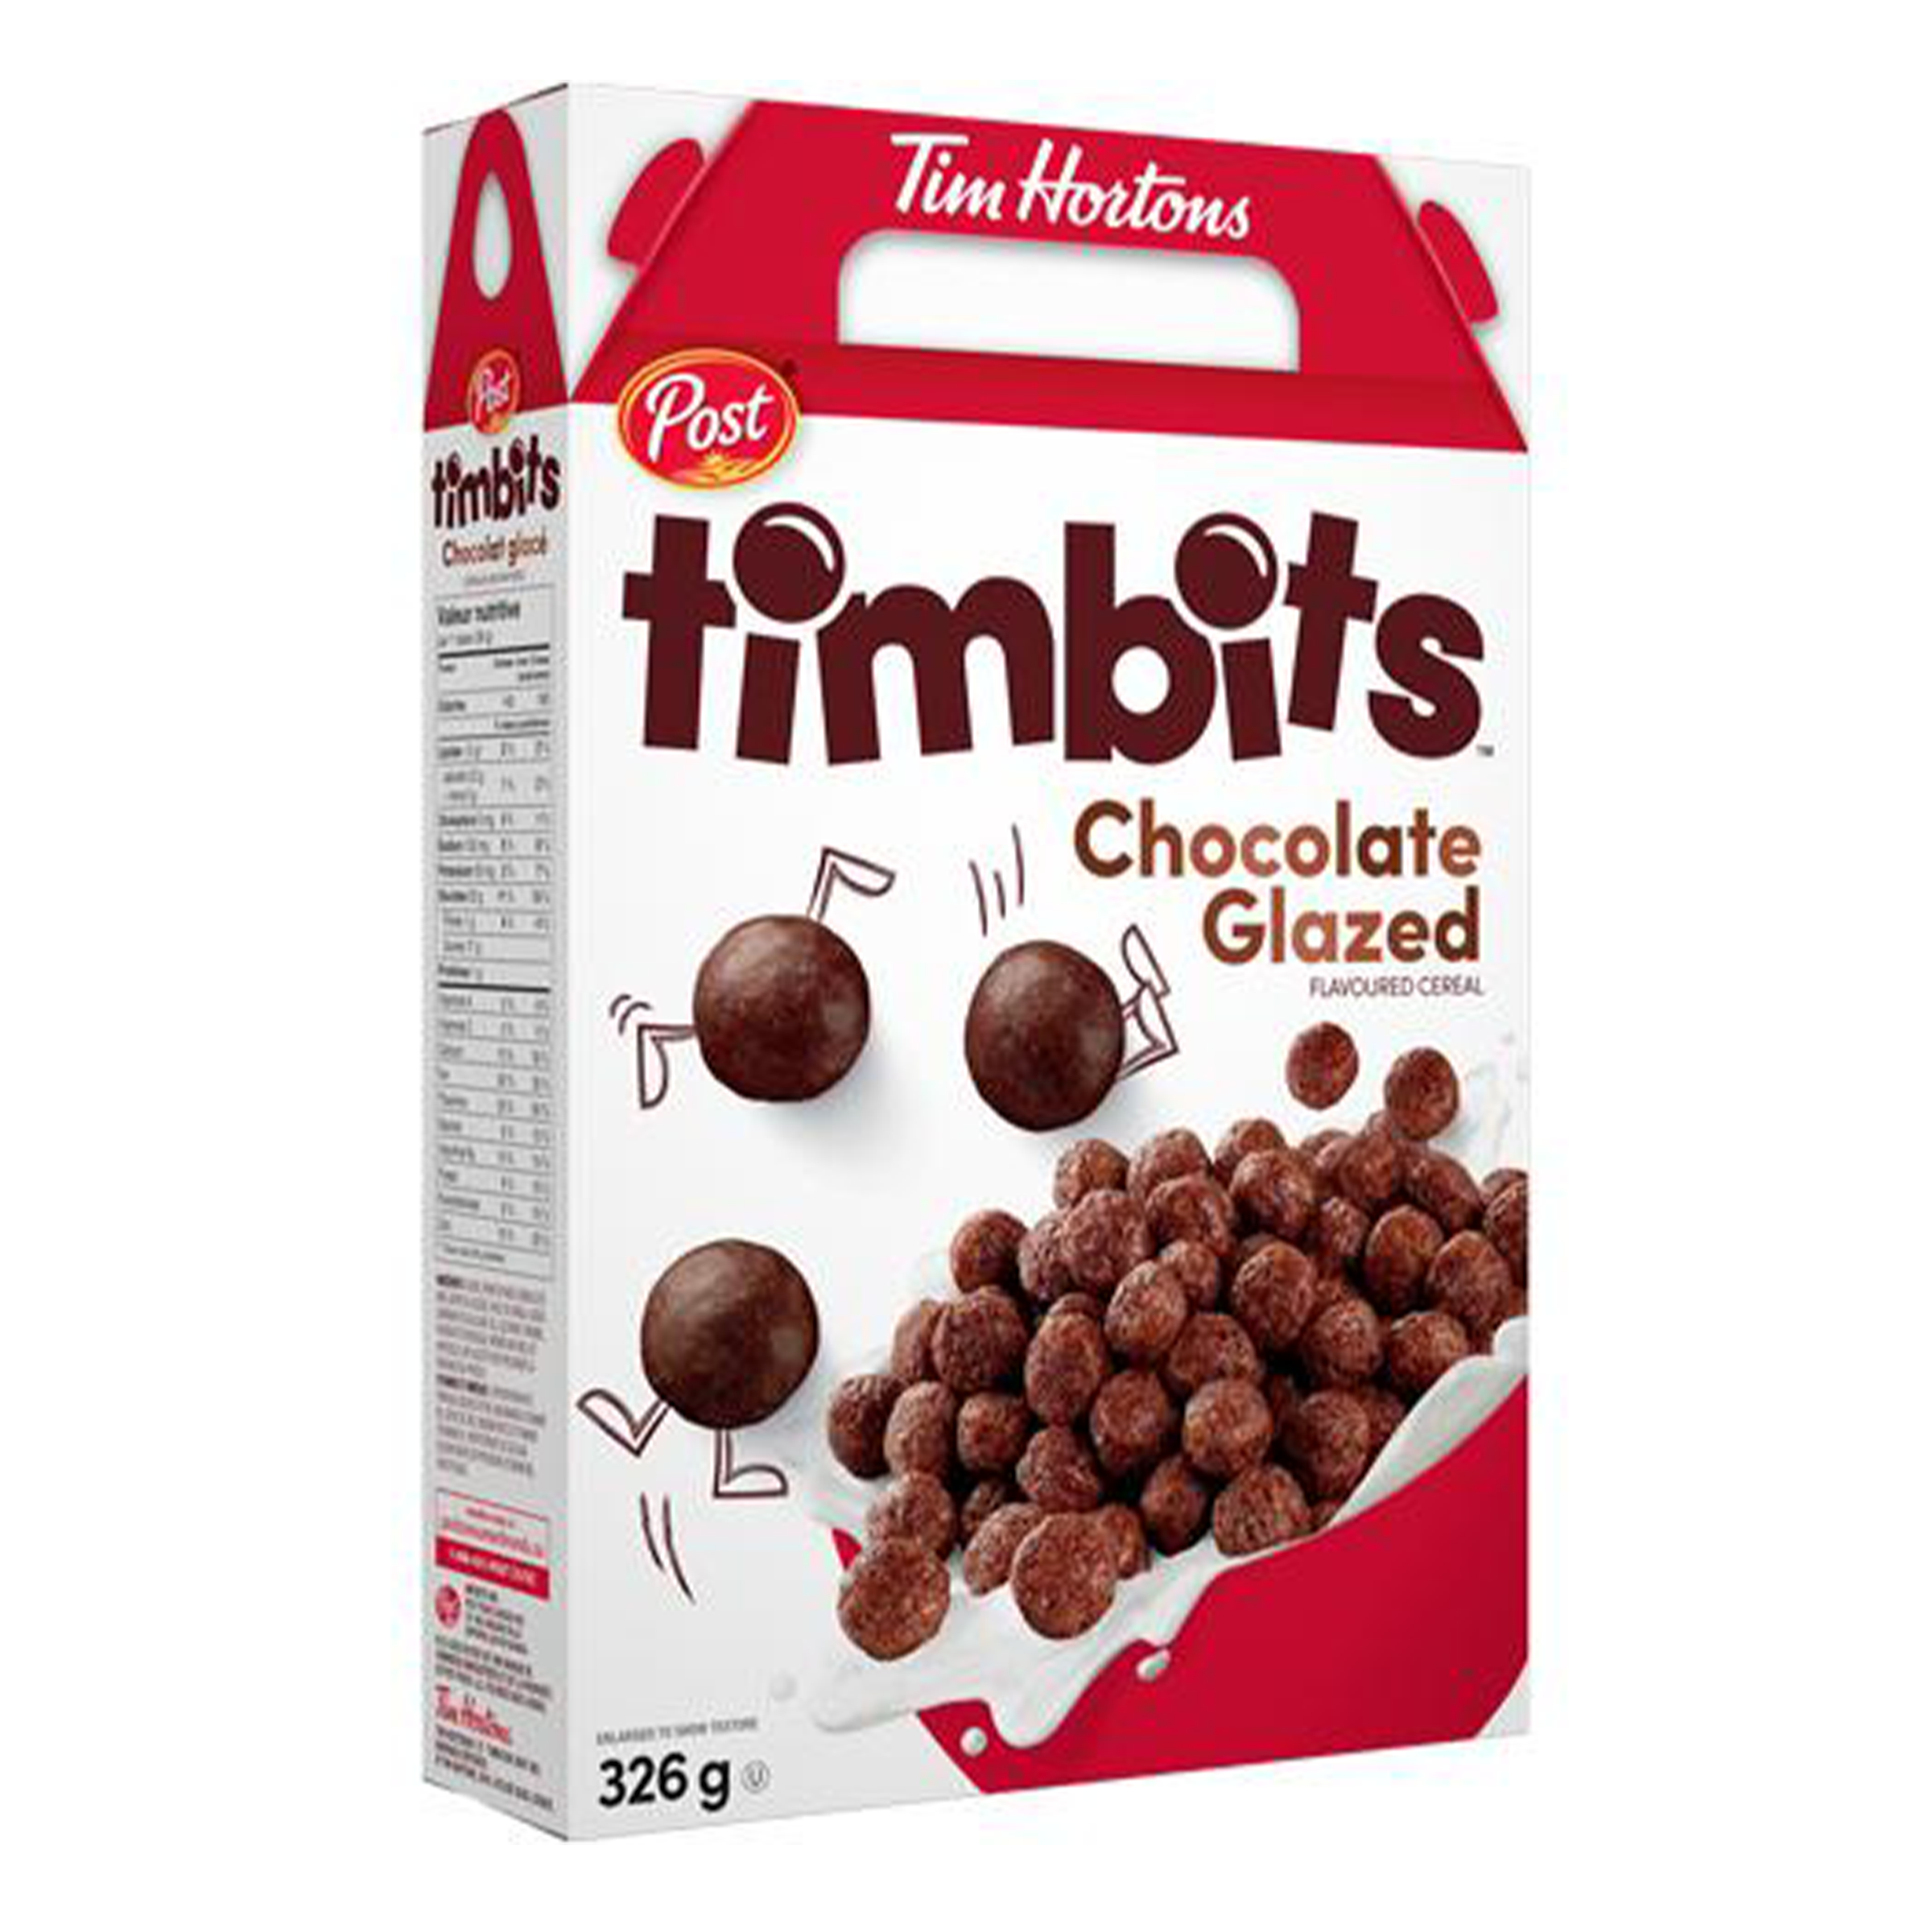 Tim Hortans - Chocolate Glazed Timbits Cereal